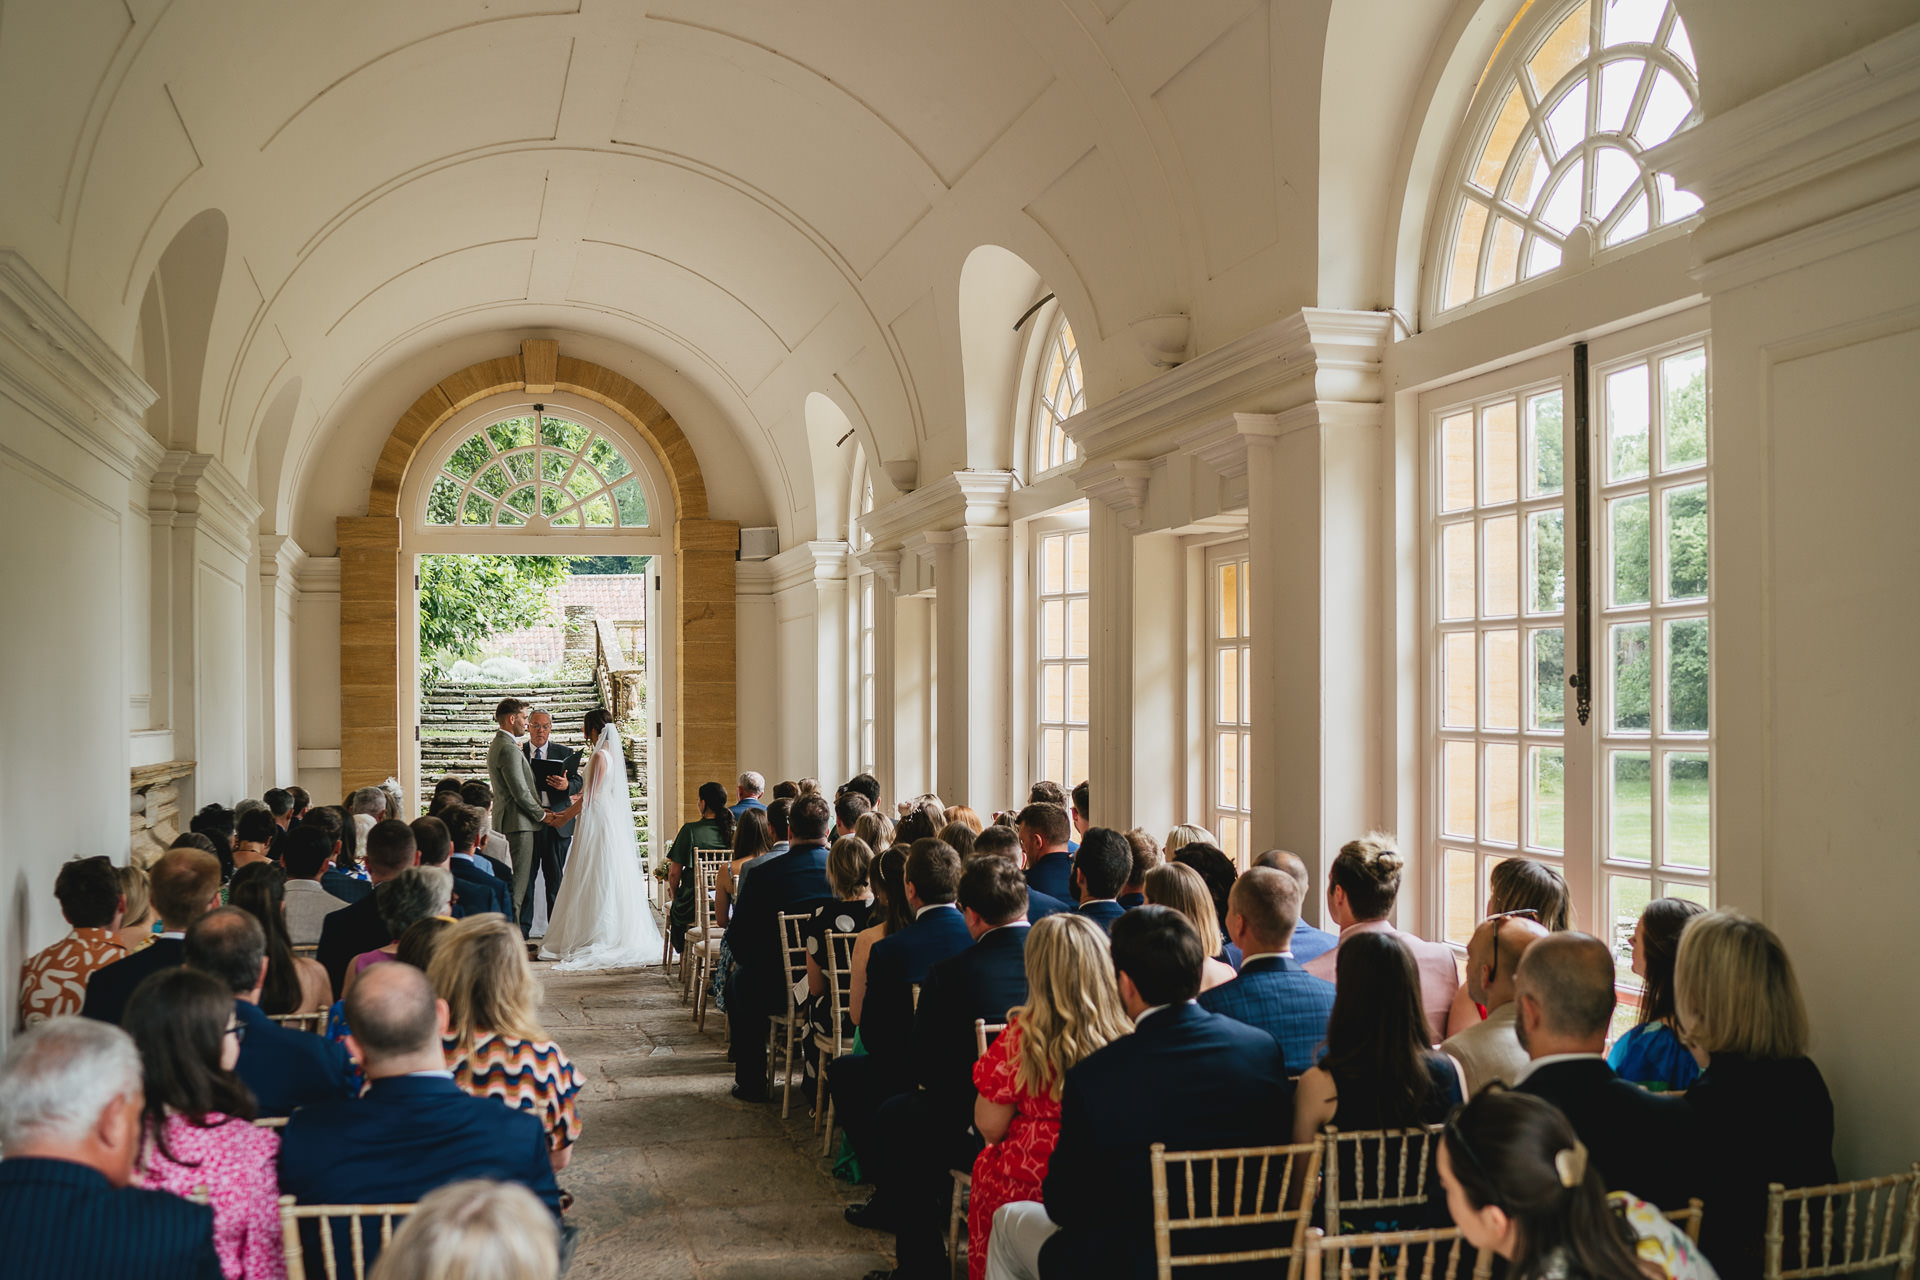 A wedding in the orangery at Hestercombe Gardens in Somerset